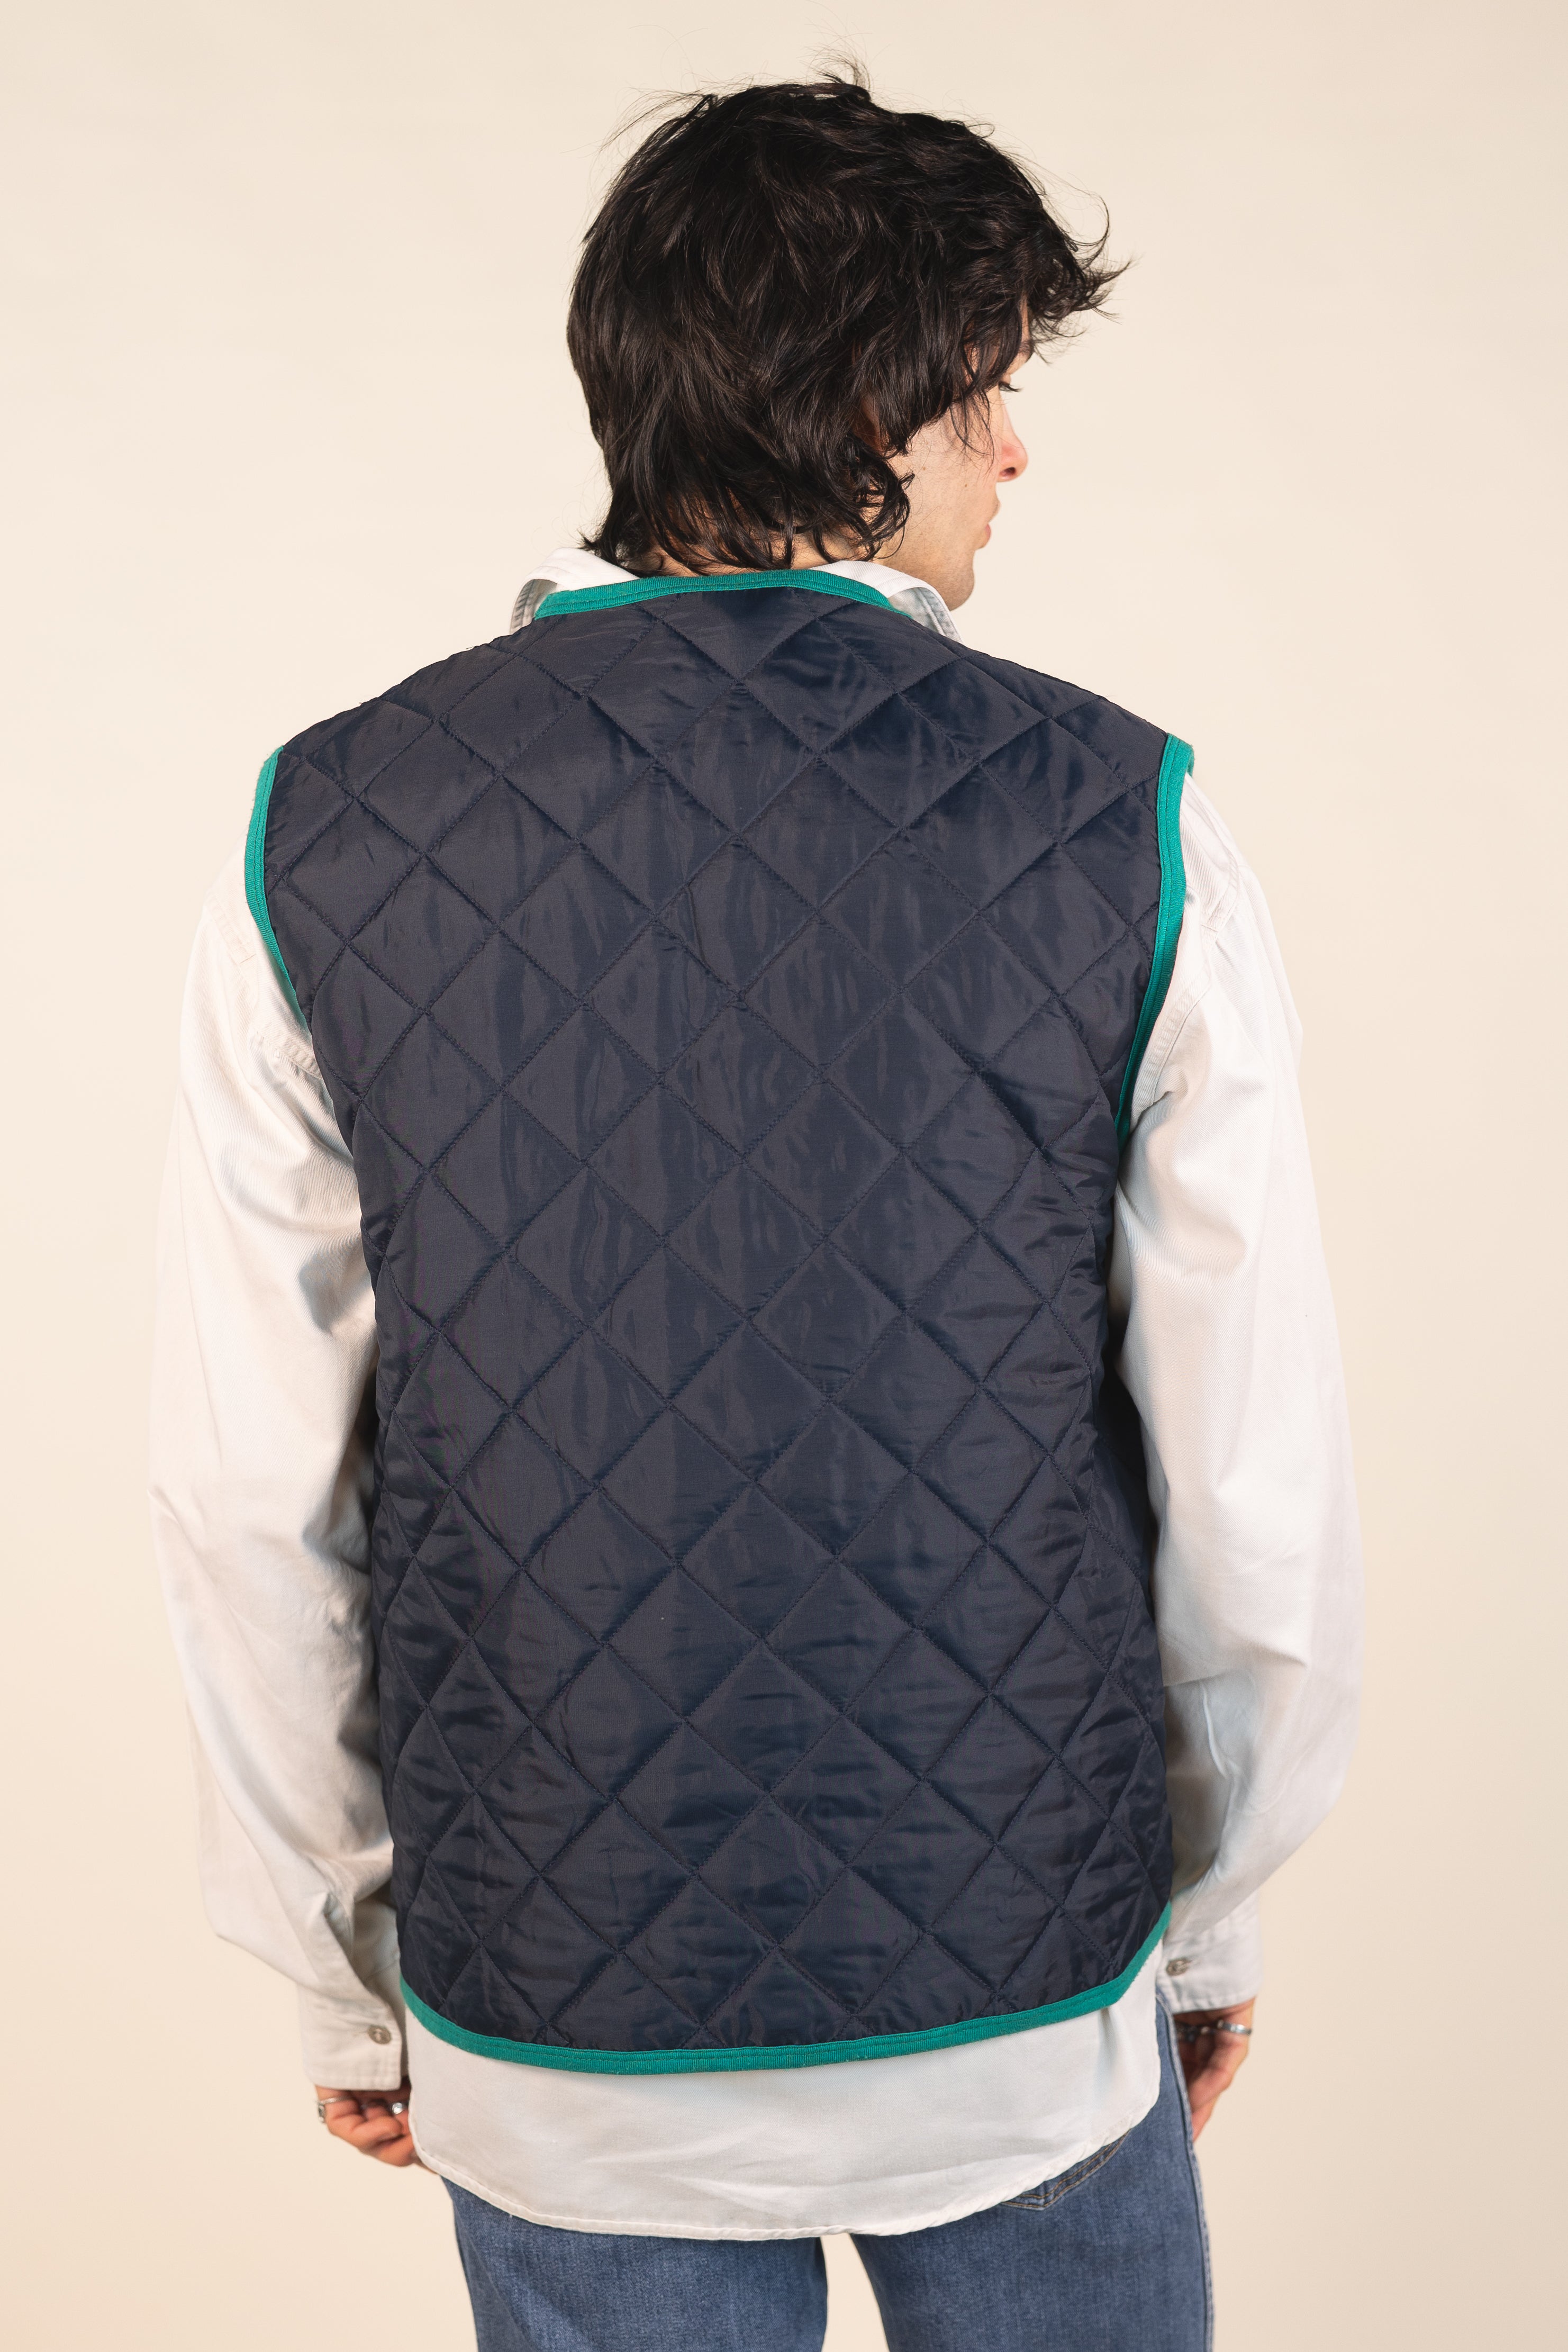 Quilted Waistcoat